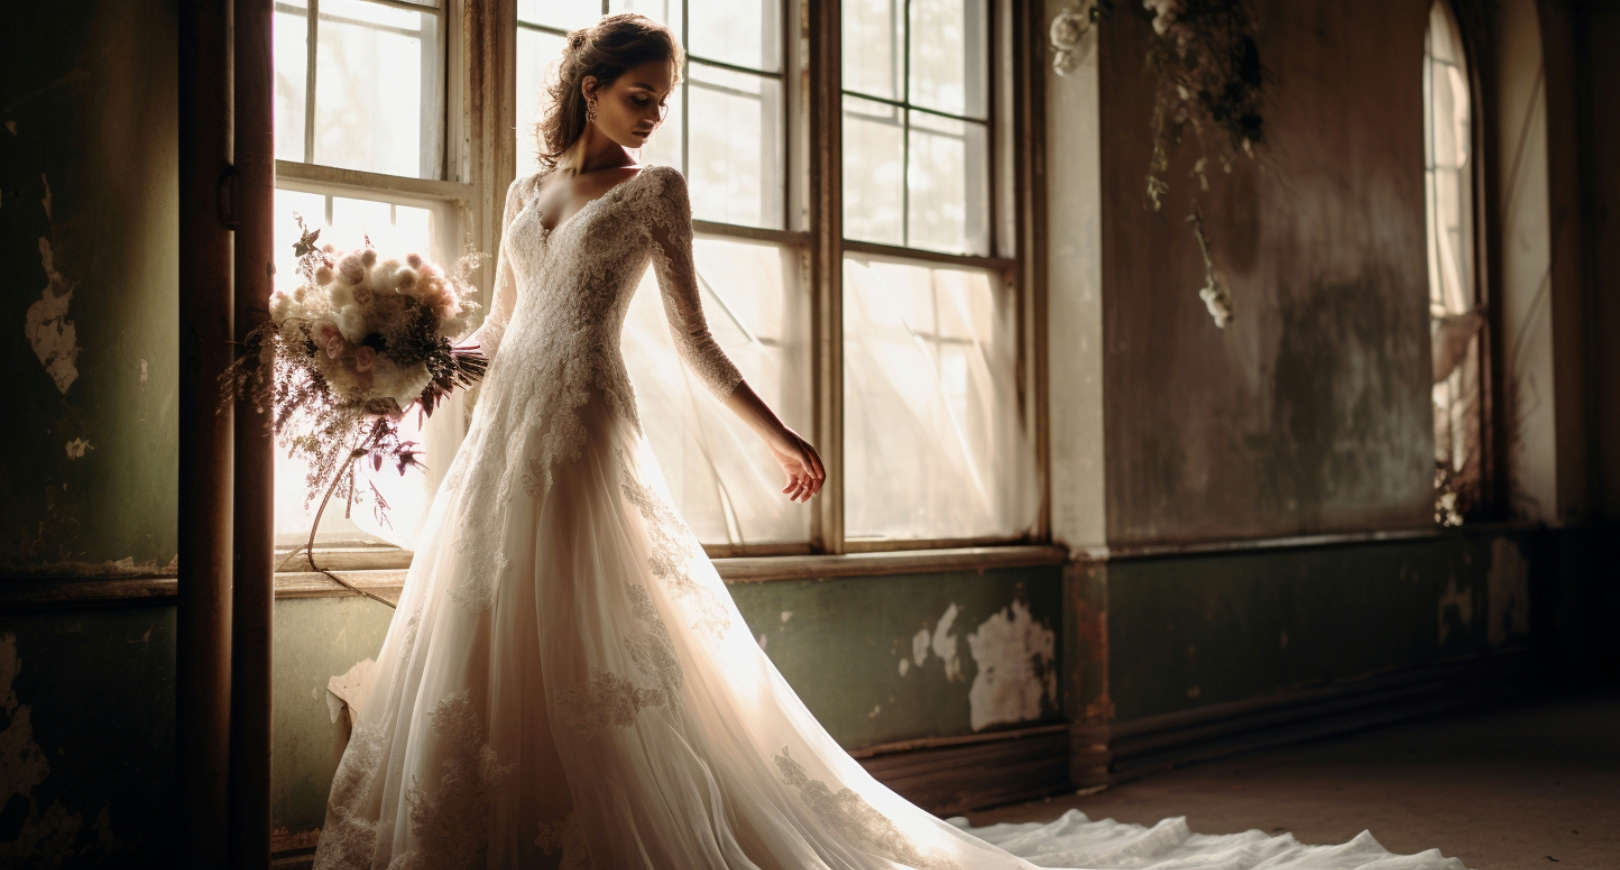 How much does it cost to save a wedding dress